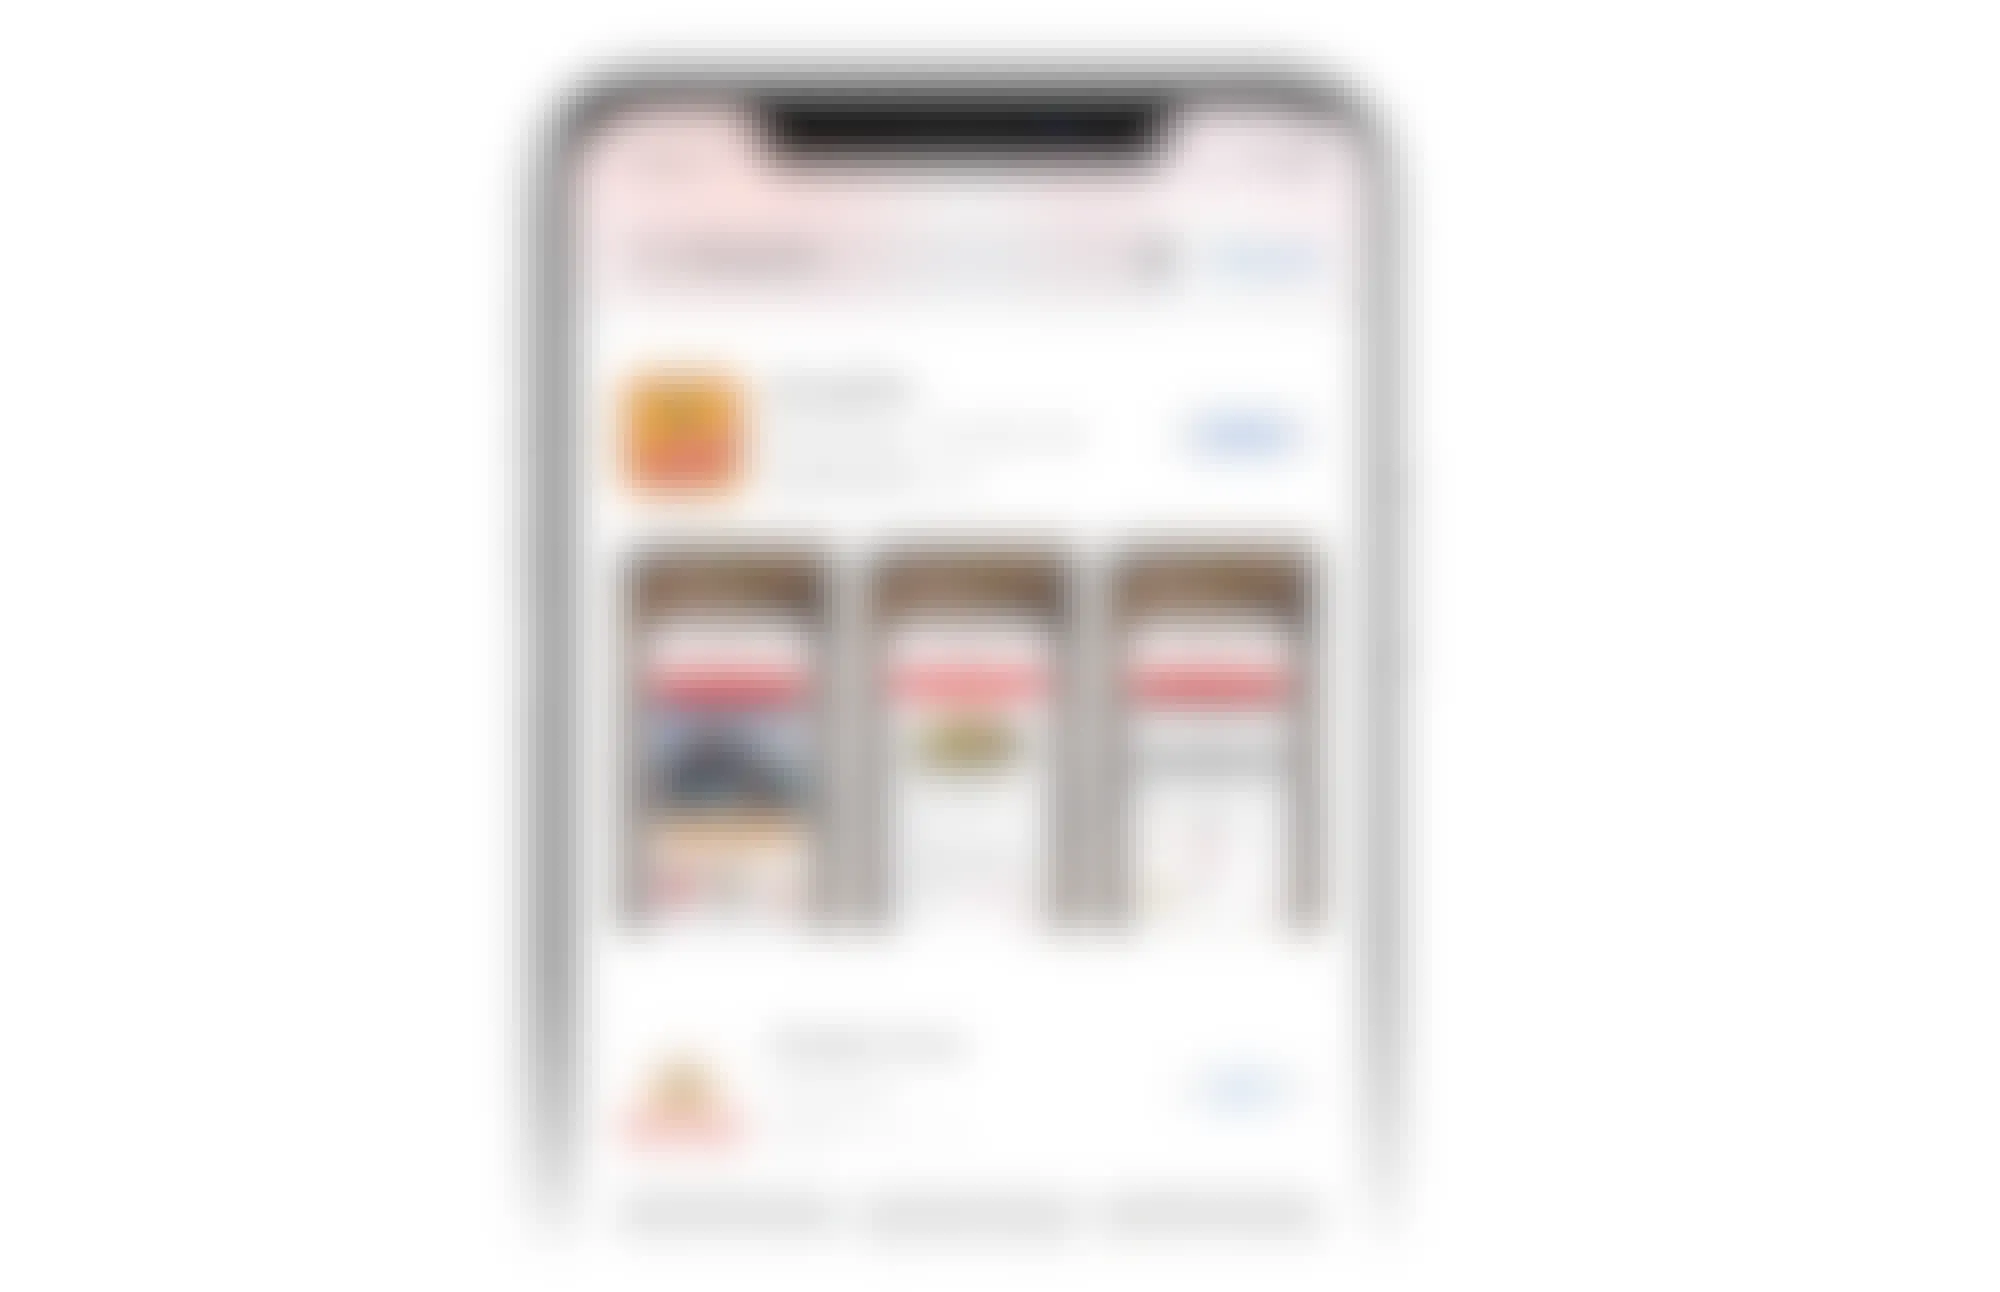 phone screen showing shoprite app in app store with open button to the right